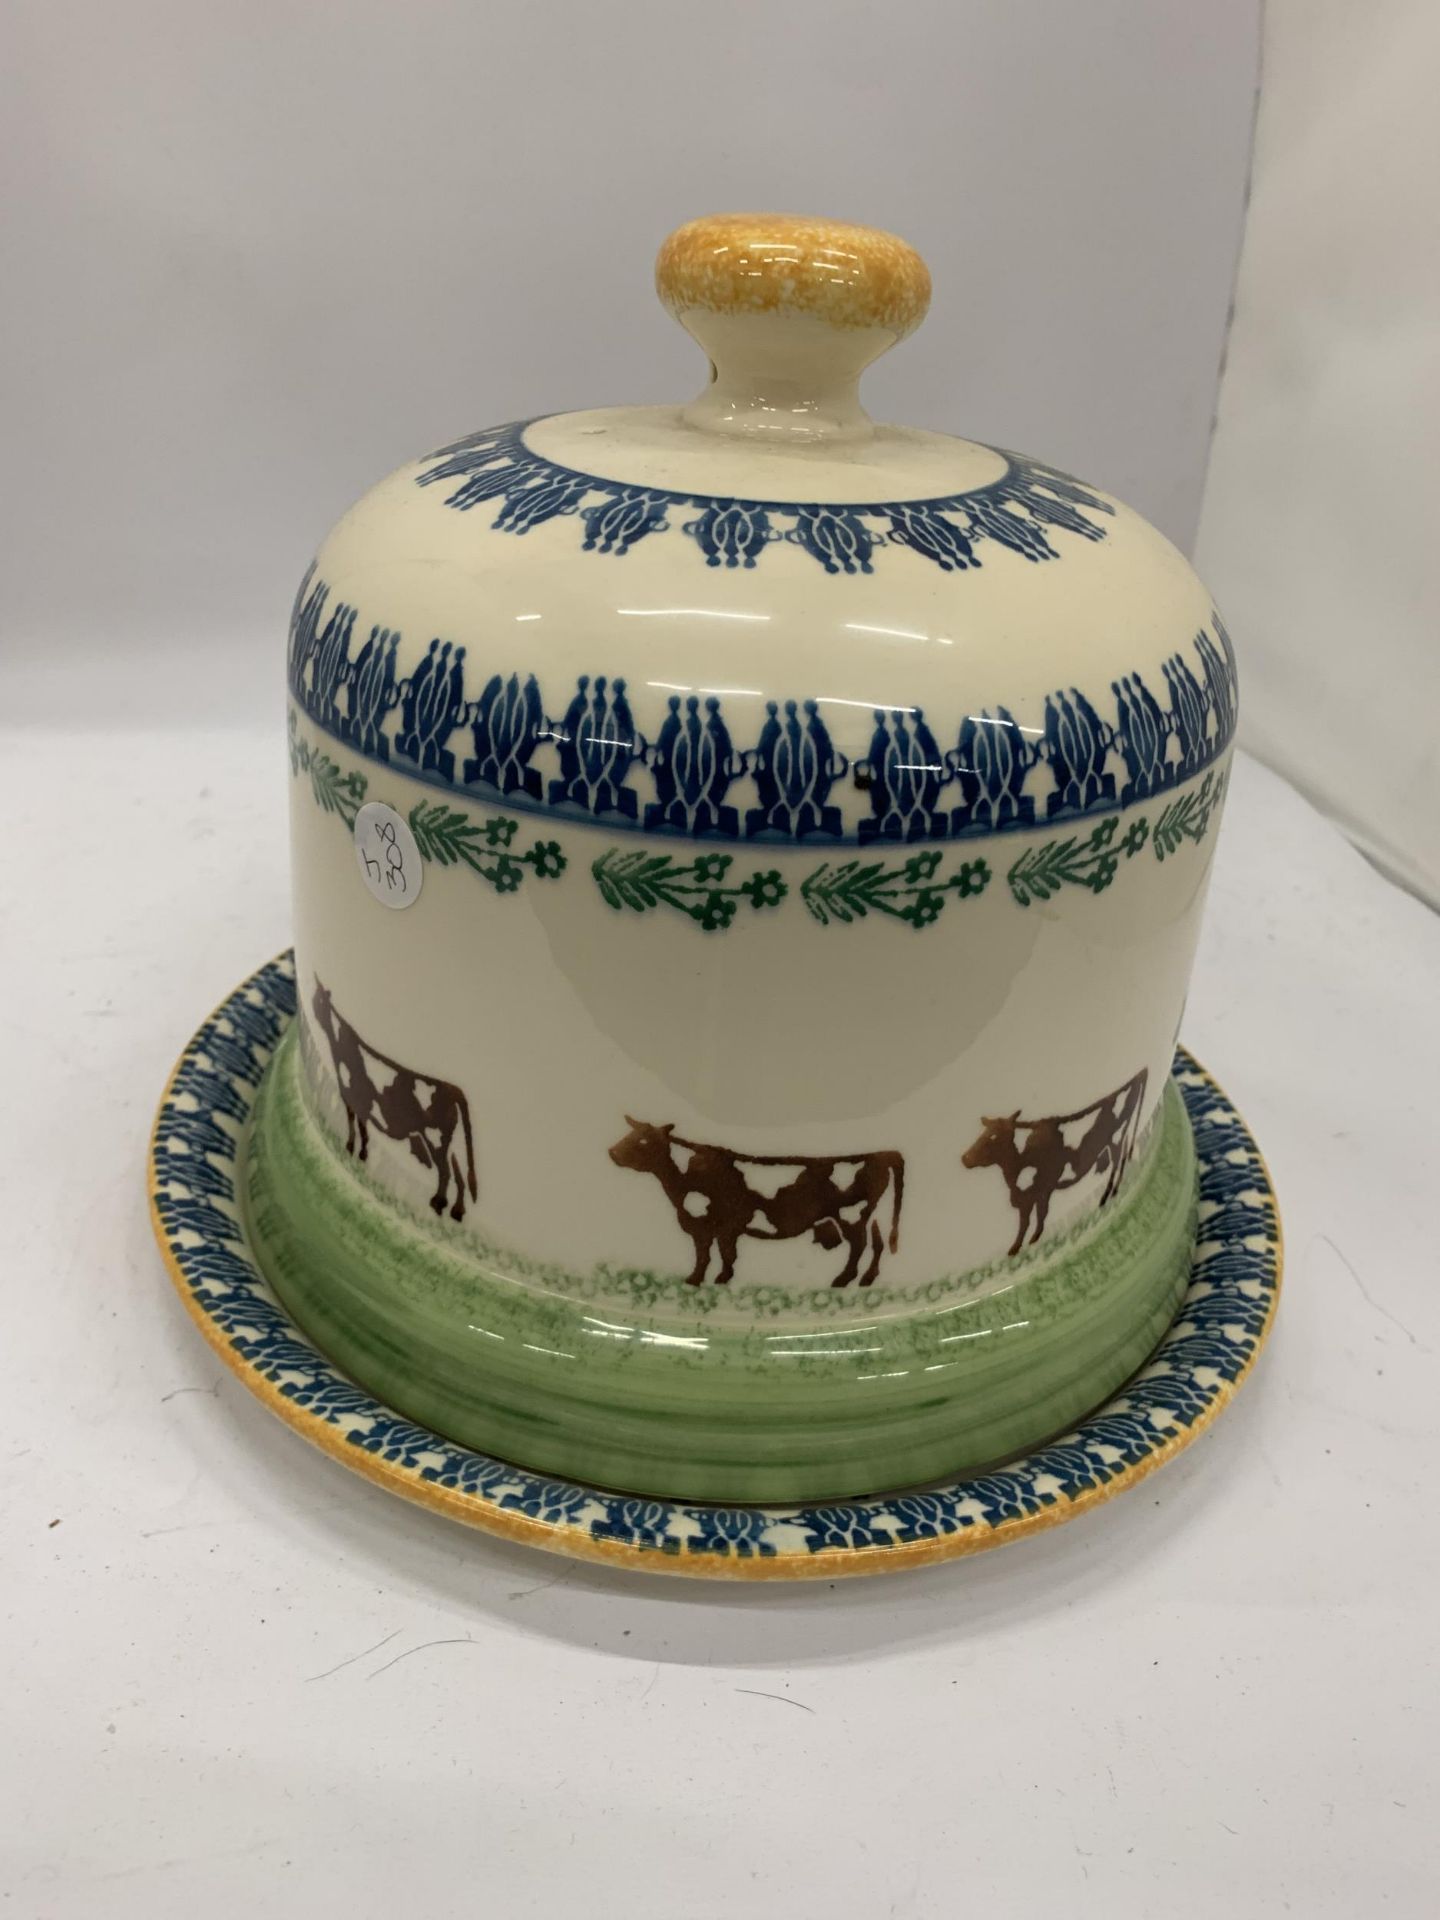 A LARGE MOORLAND POTTERY CHEESE PLATE AND DOME WITH COW DECORATION